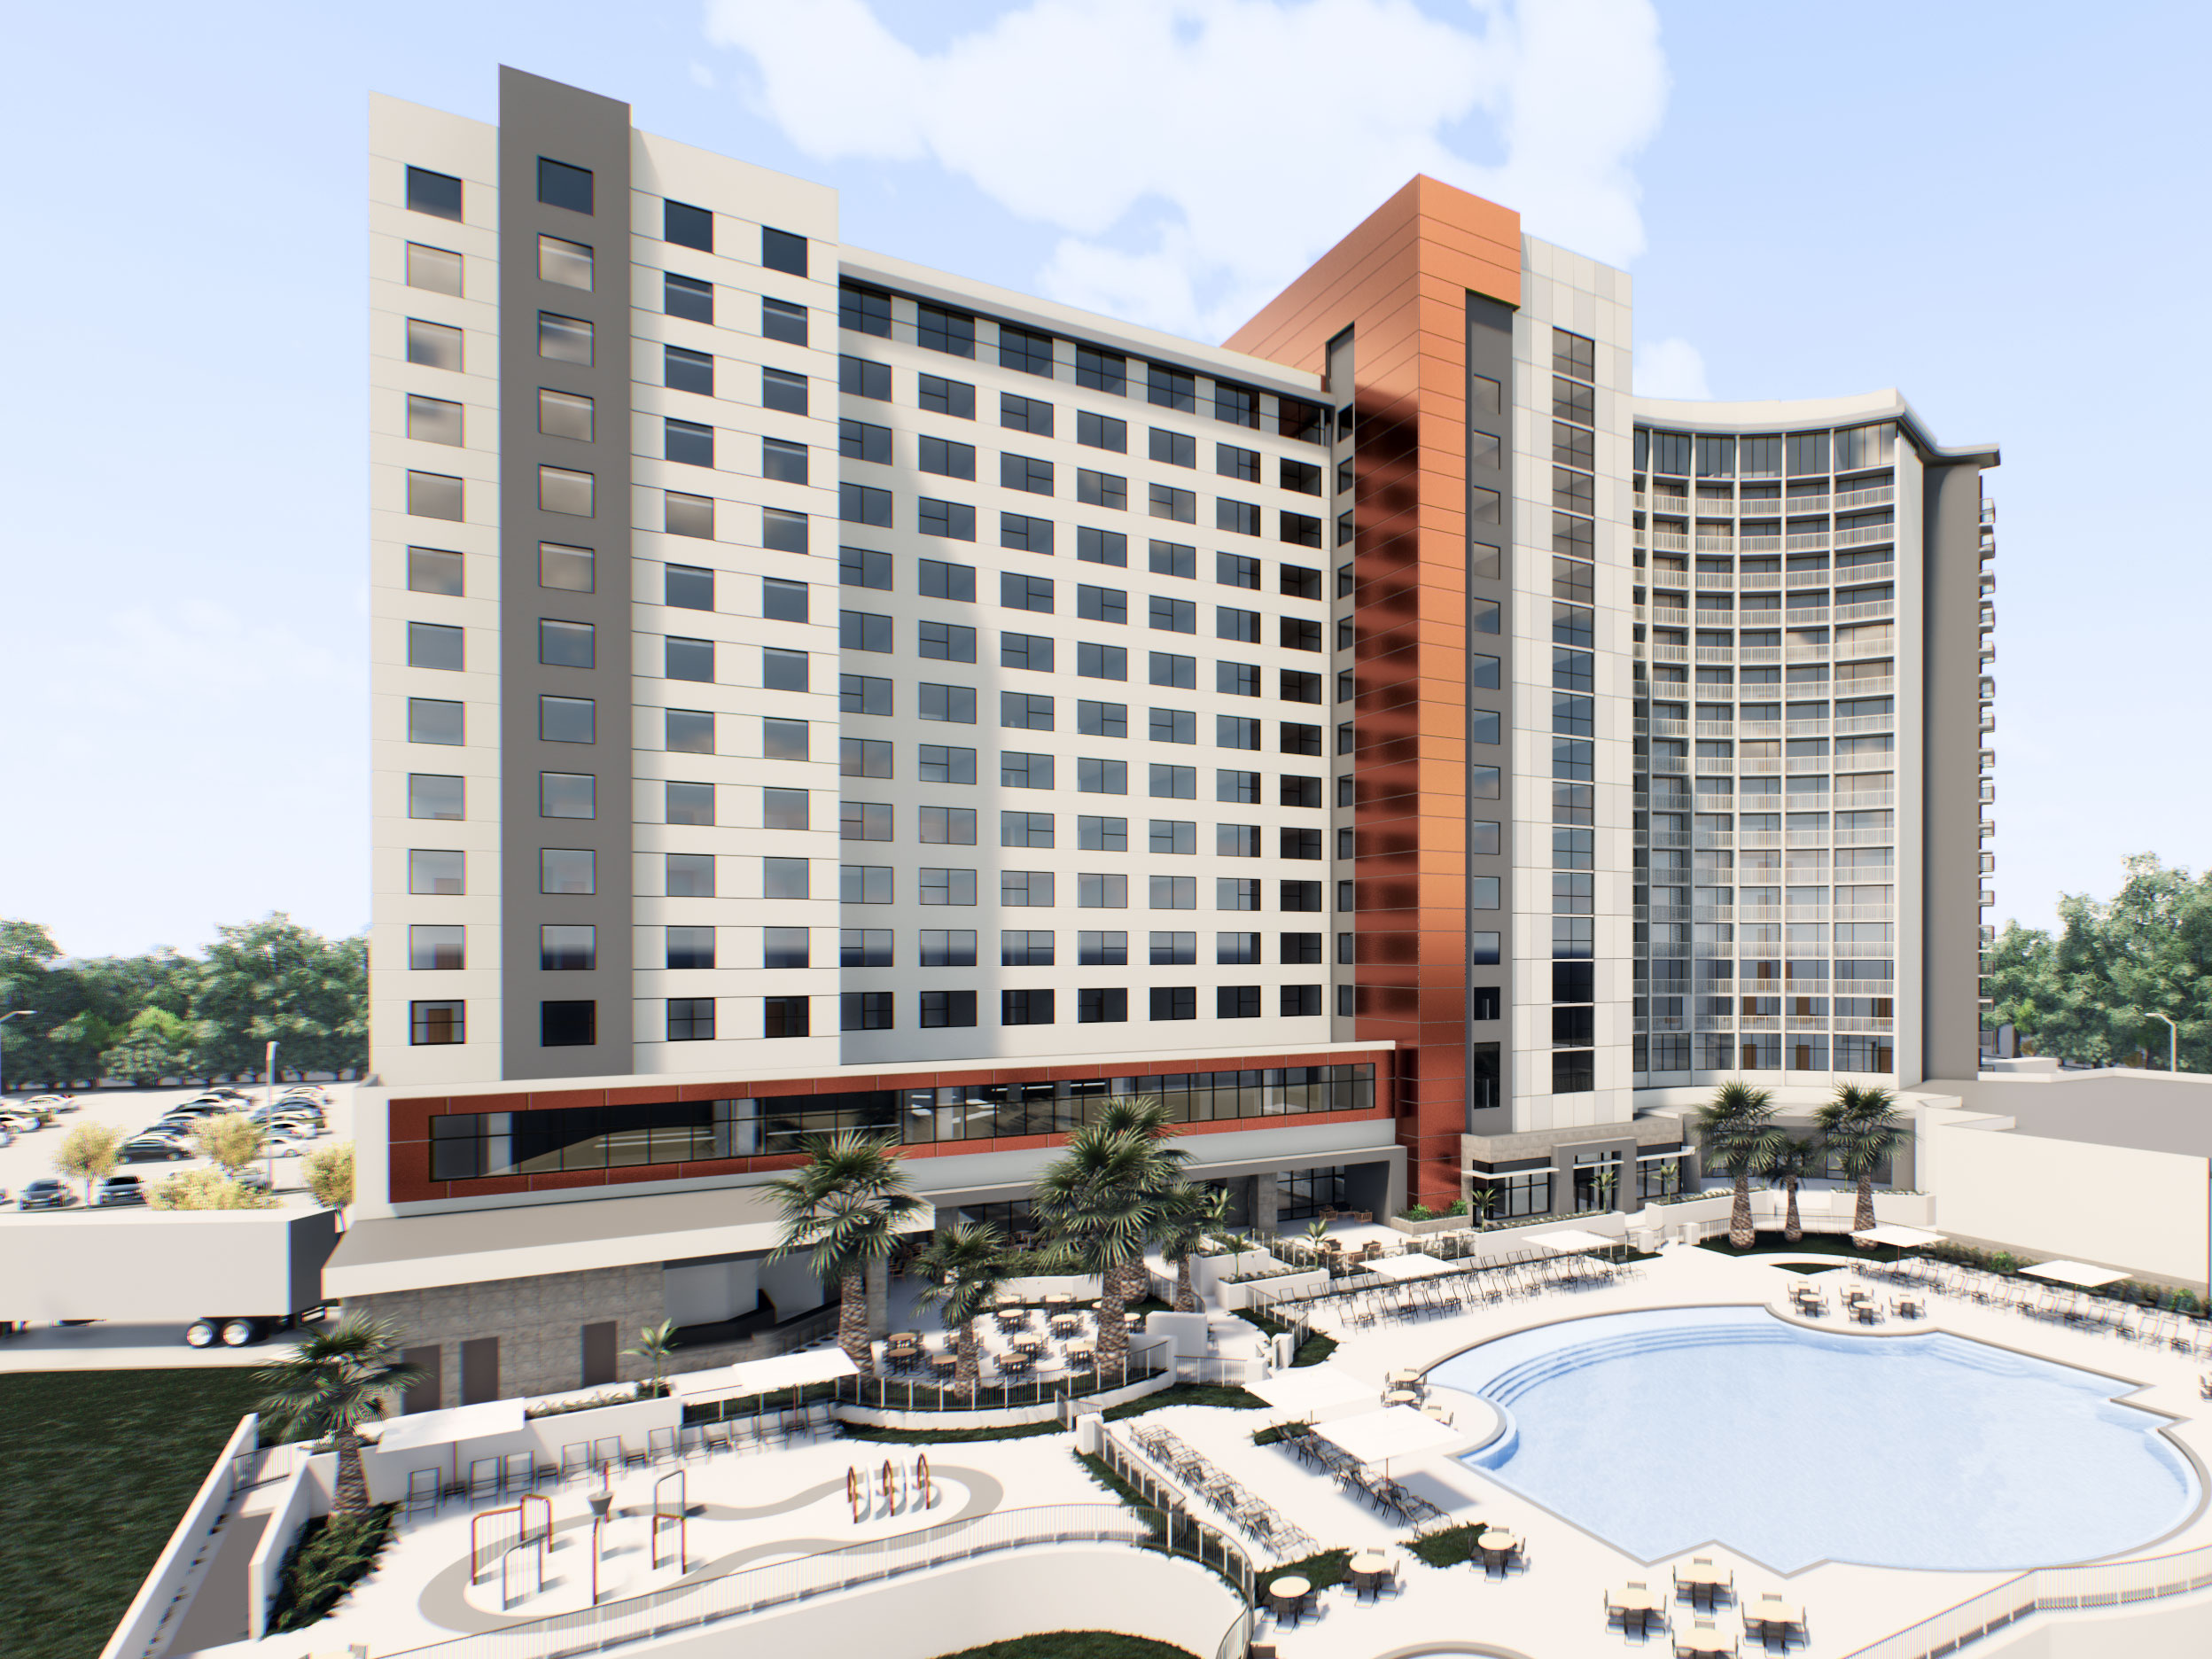 Drury Plaza Hotel Orlando - Disney Springs® Area - Now Accepting Reservations for October 27, 2022 and beyond!